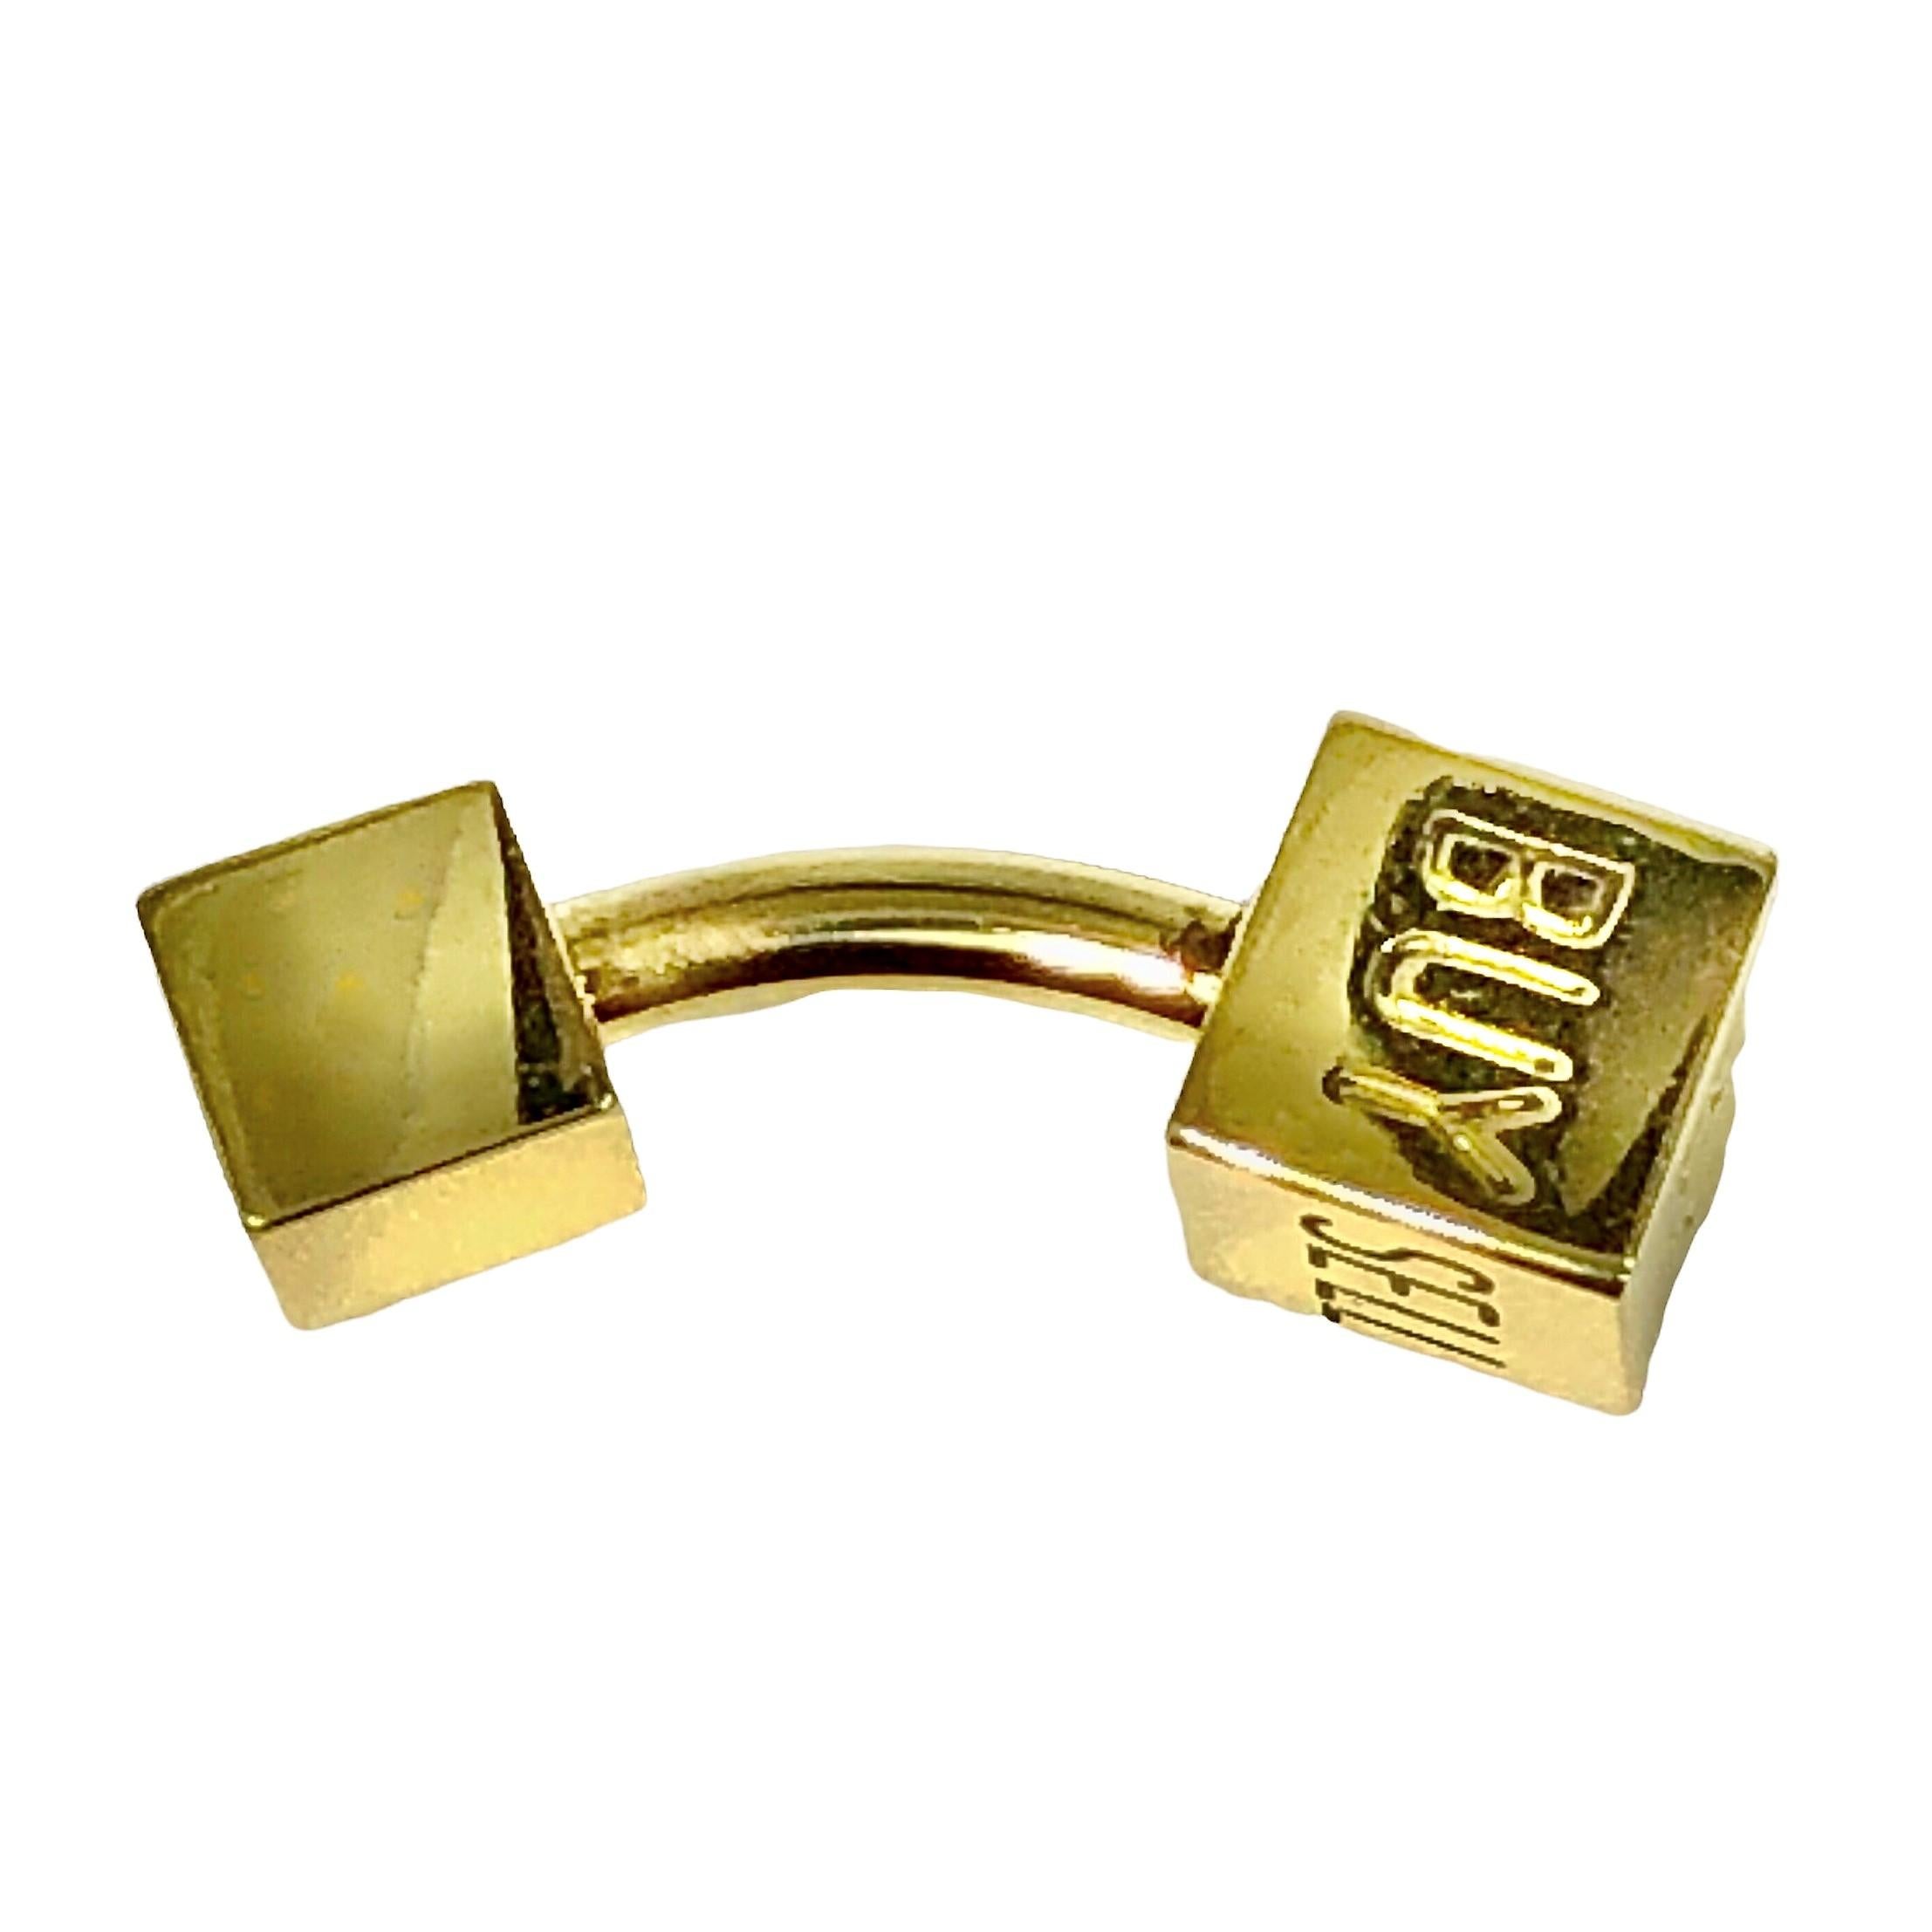 Modern Tiffany 18K Yellow Gold Stock Broker's Cuff links, Buy, Sell, Hold For Sale